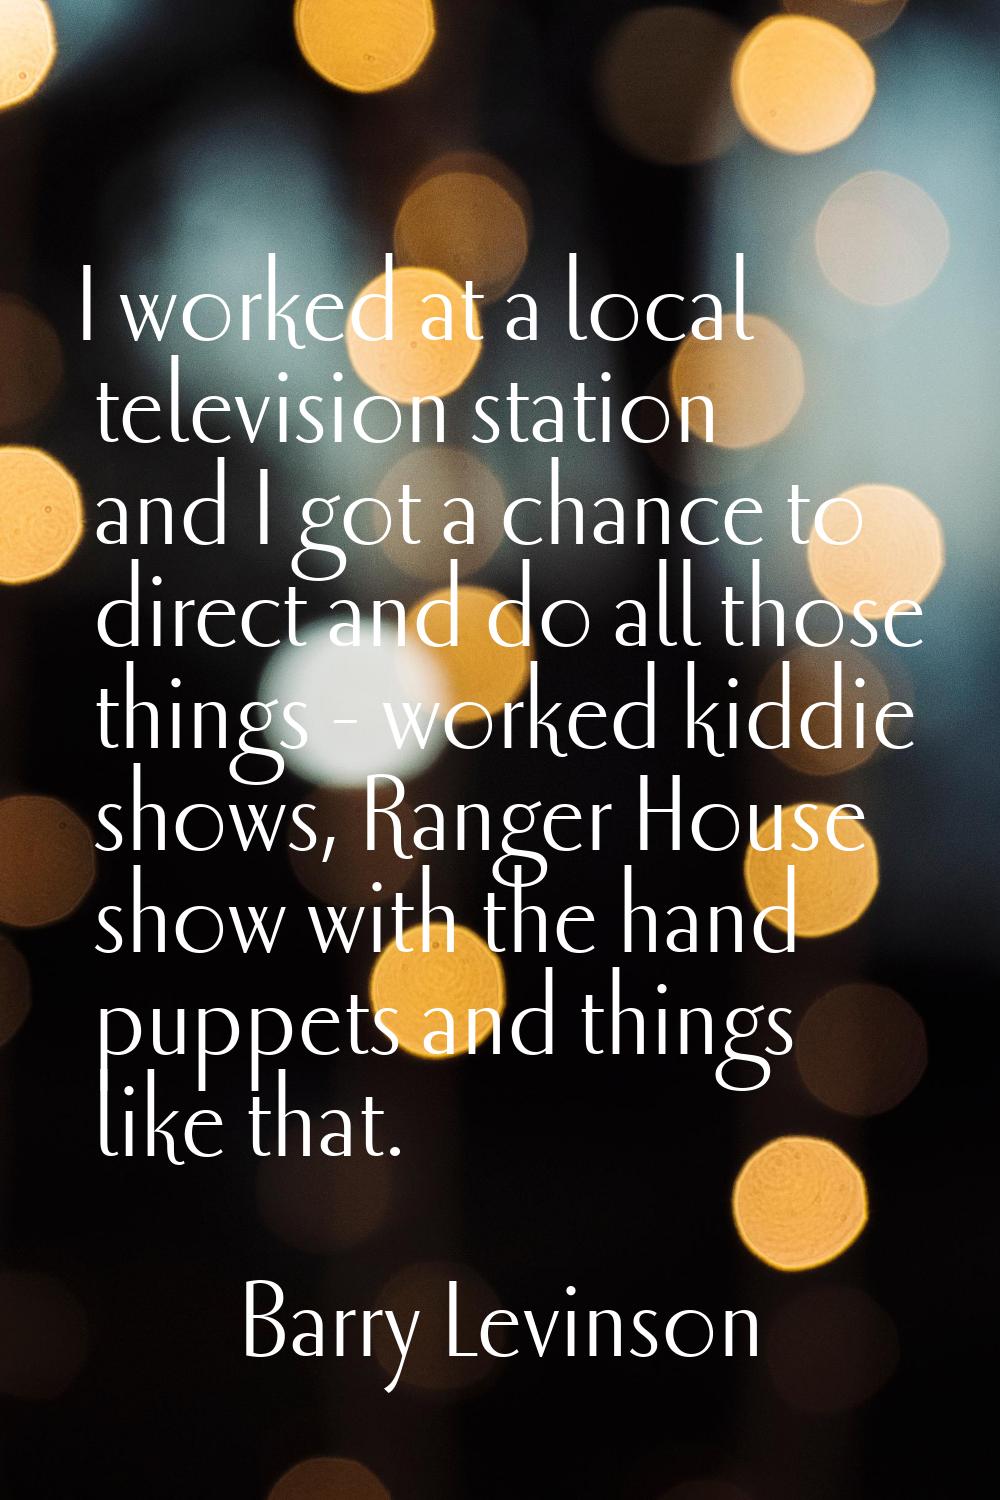 I worked at a local television station and I got a chance to direct and do all those things - worke